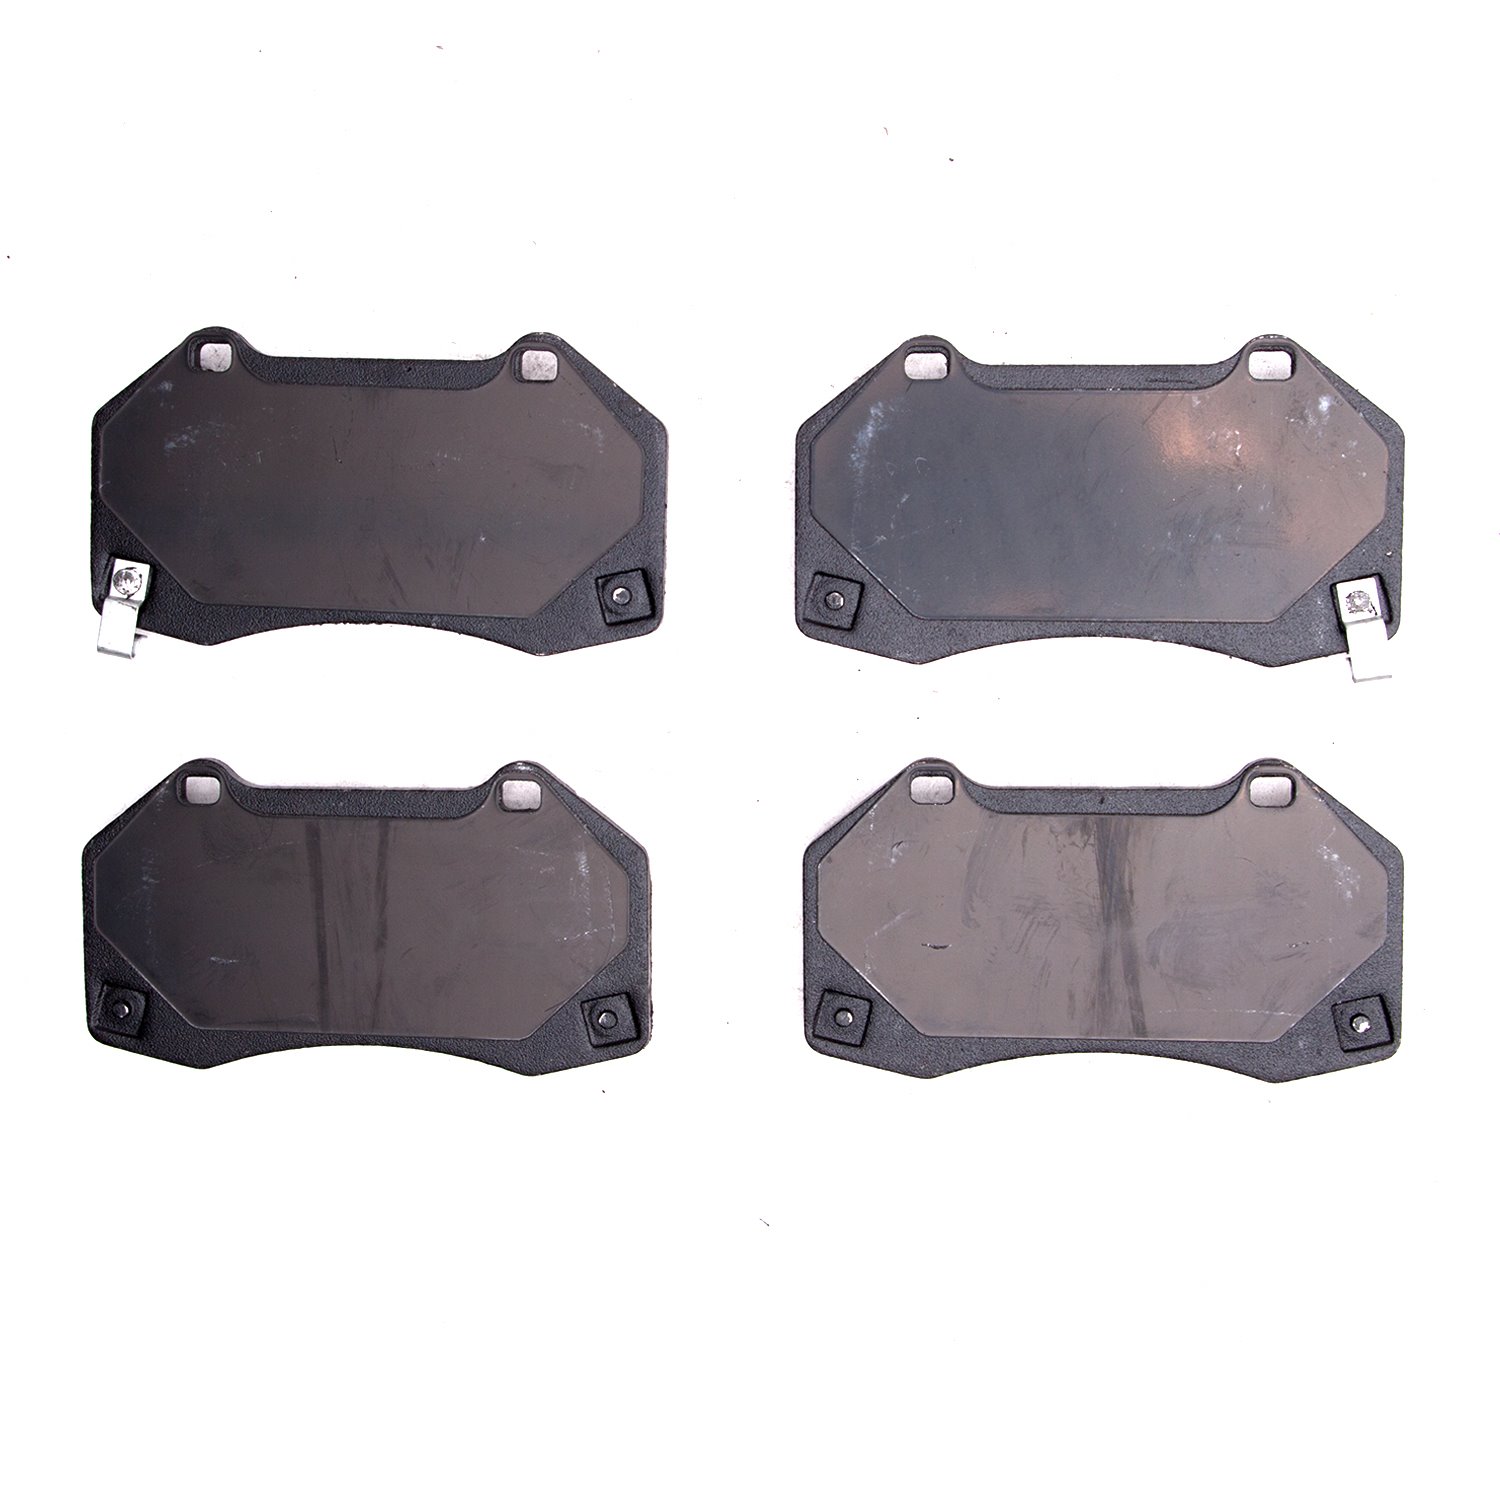 1310-1379-20 3000-Series Ceramic Brake Pads, Fits Select Multiple Makes/Models, Position: Front